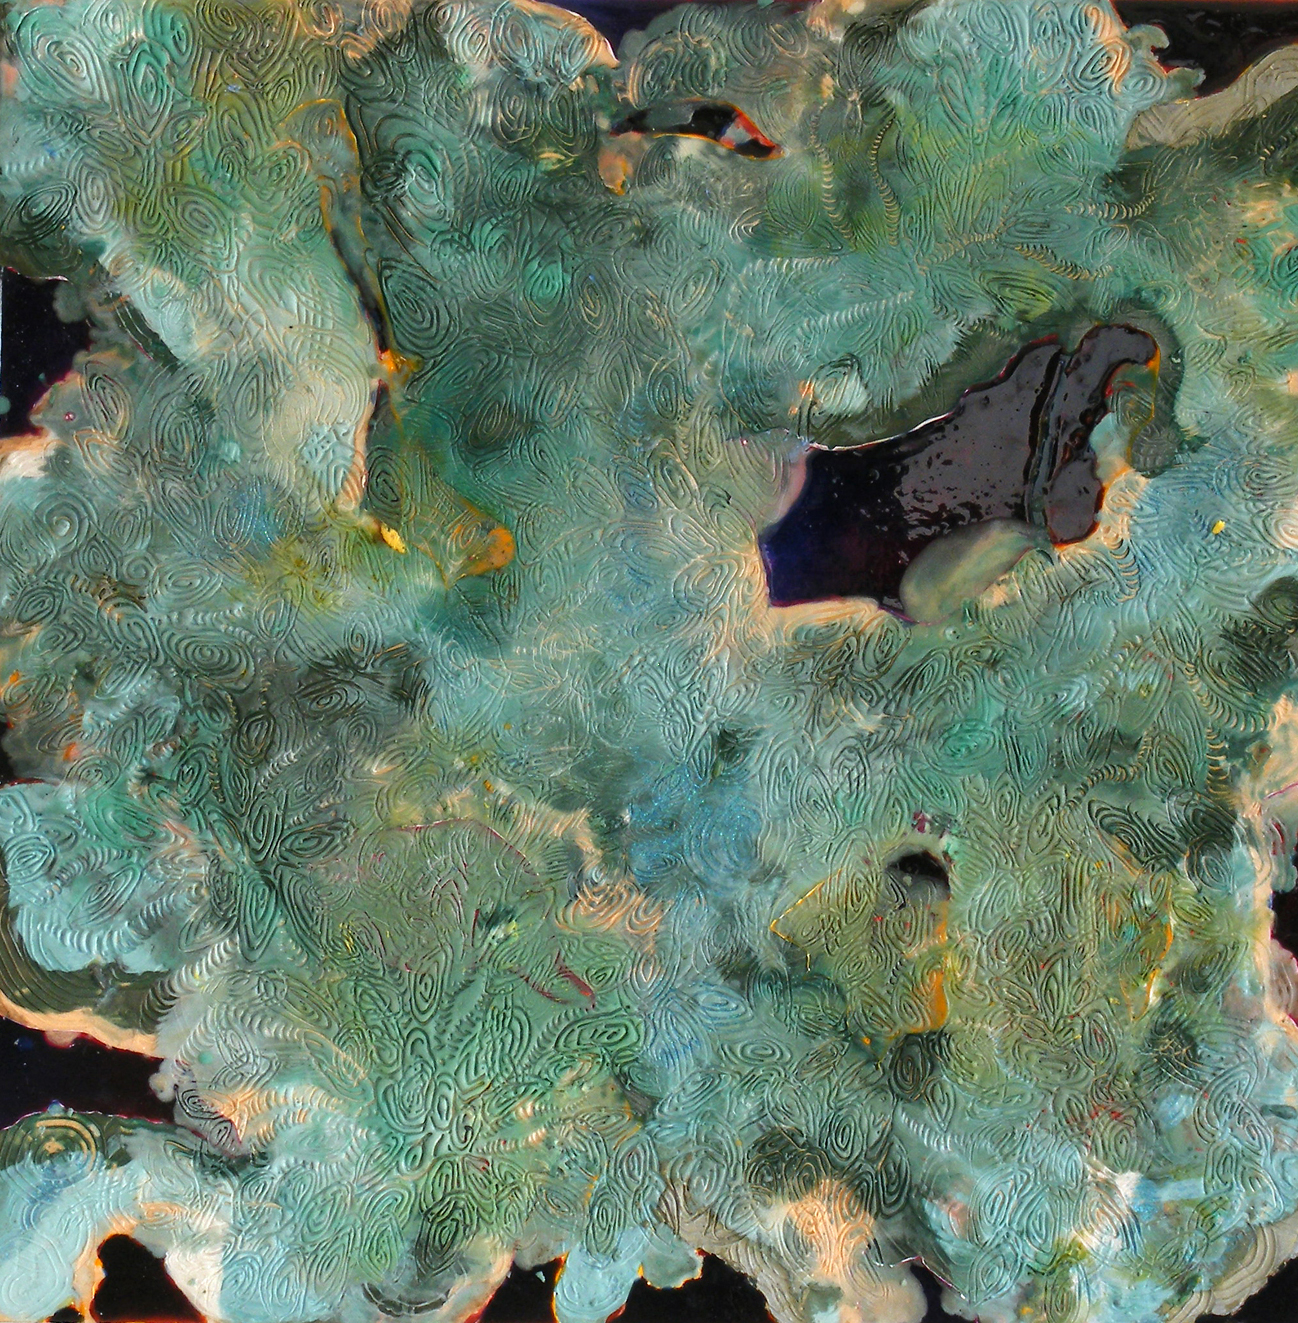 Green Platelets, 2008, encaustic and urethane on panel, 24 x 24 inches